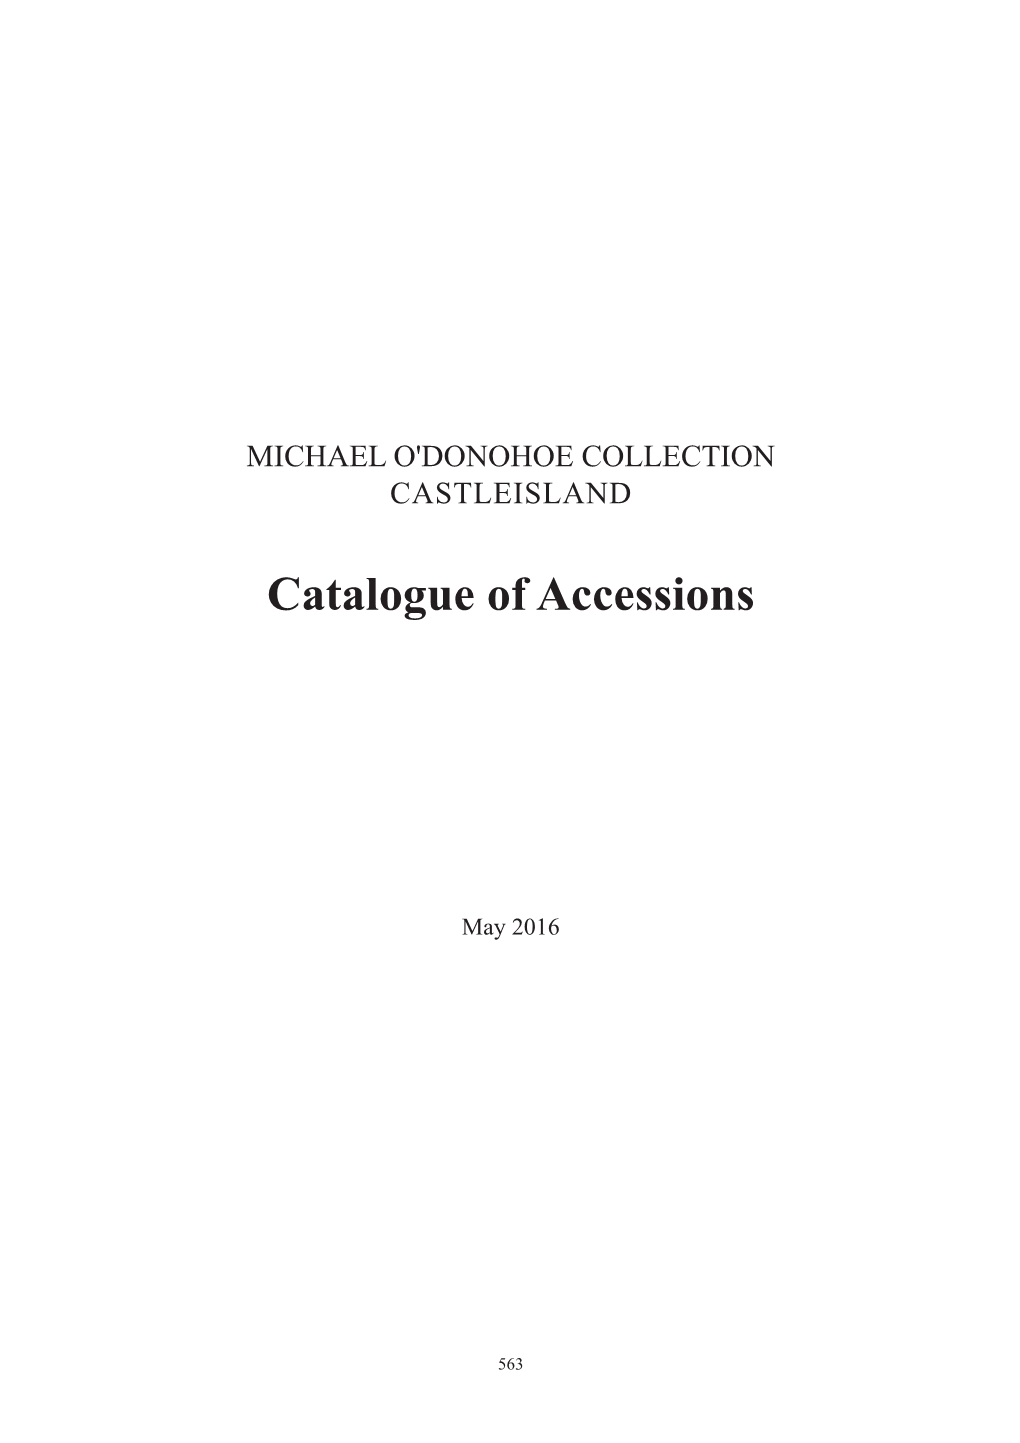 Catalogue of Accessions